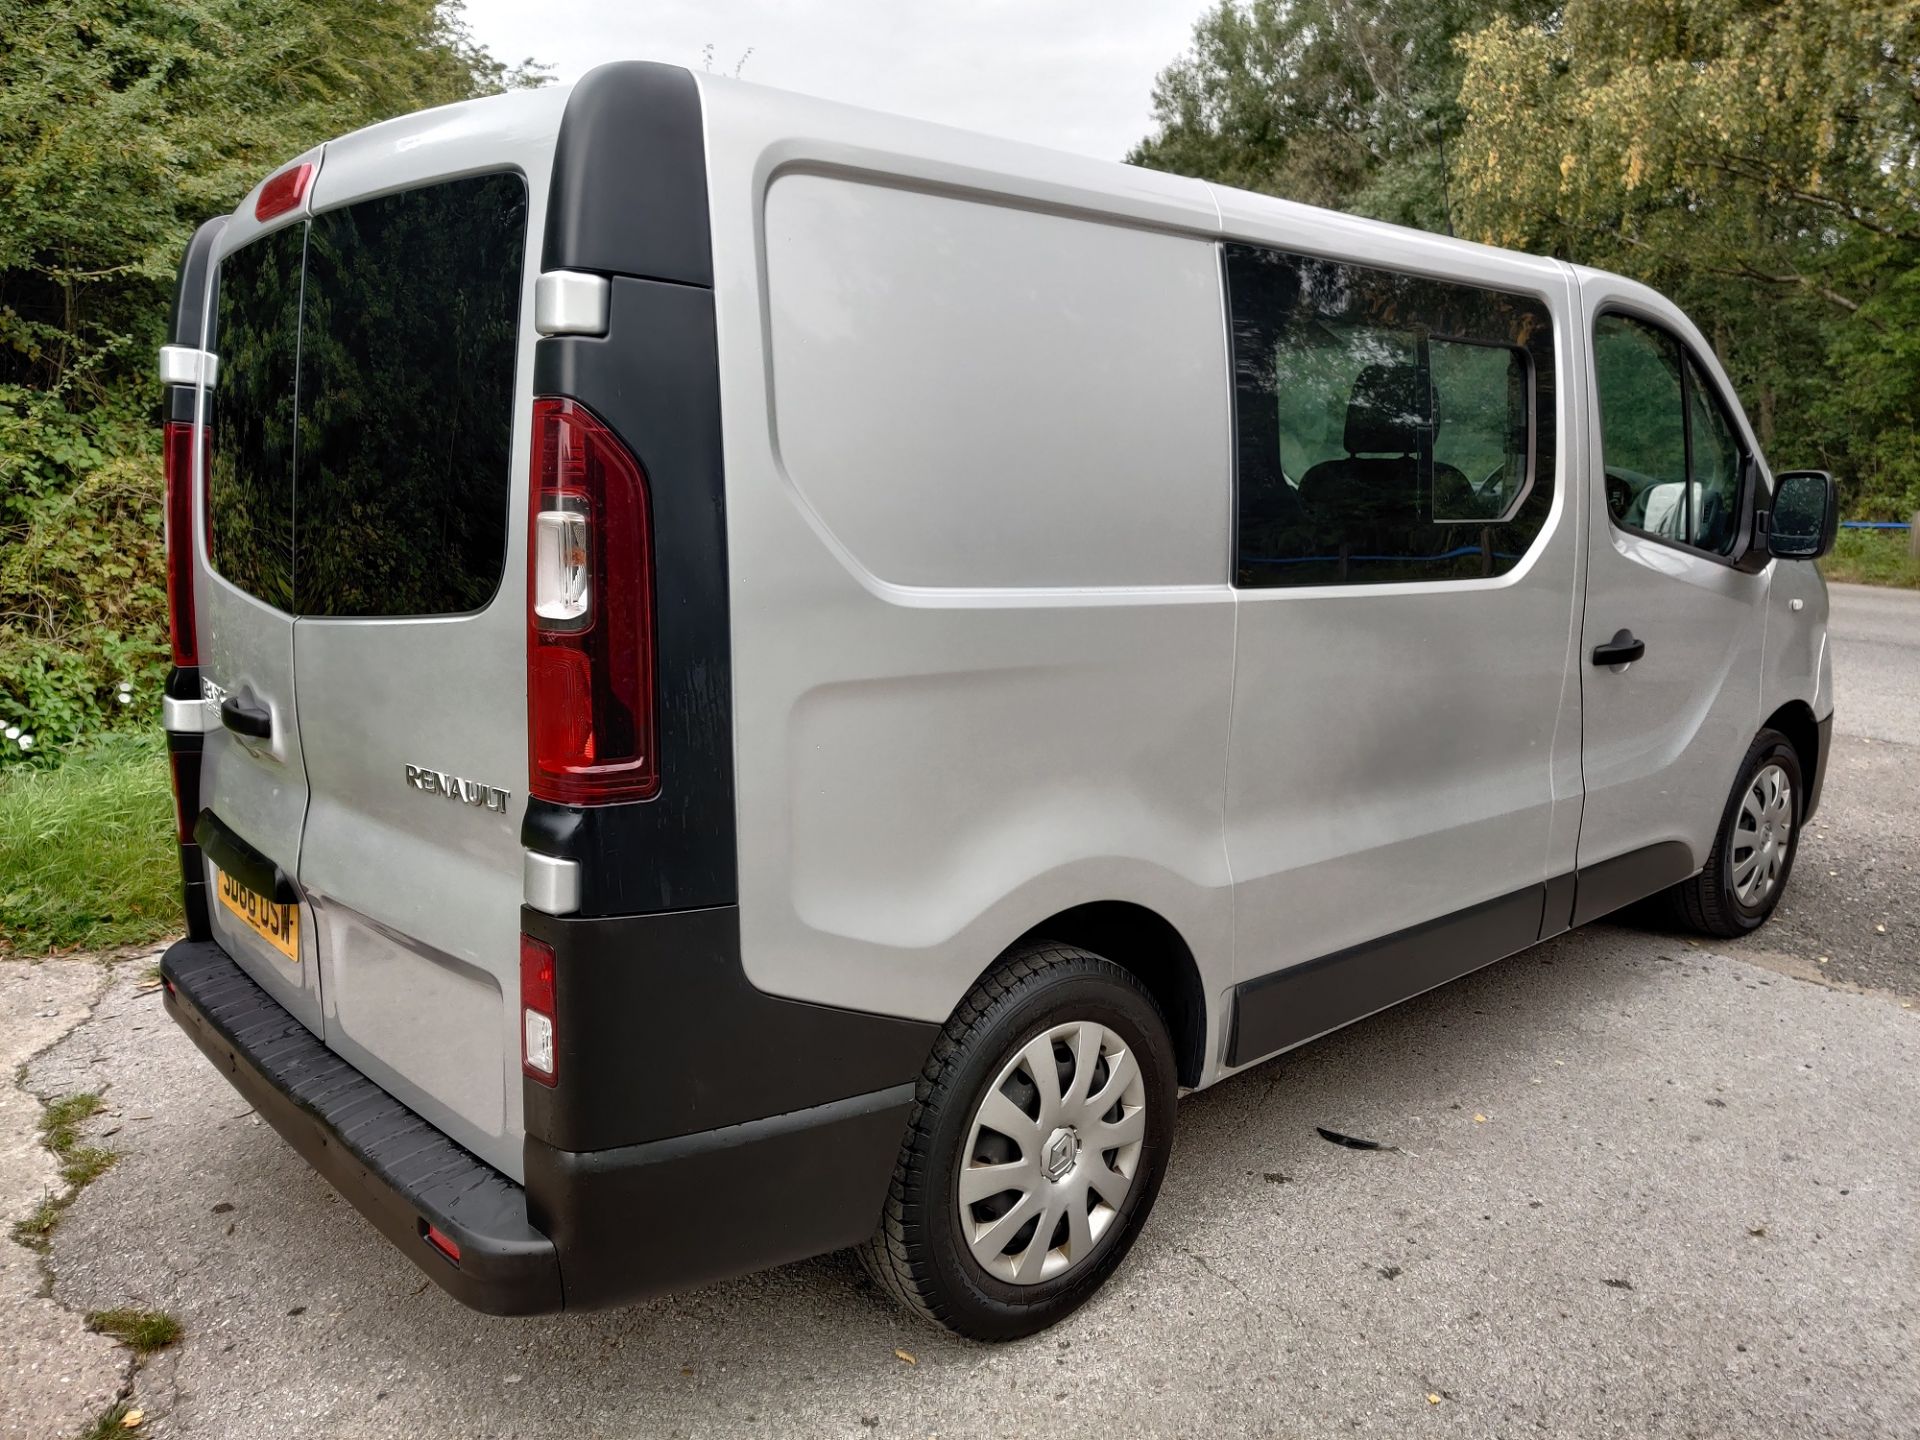 2016/66 REG RENAULT TRAFIC SL27 BUSINESS DCI 1.6 DIESEL SILVER MPV - 7 SEATER *NO VAT* - Image 6 of 16